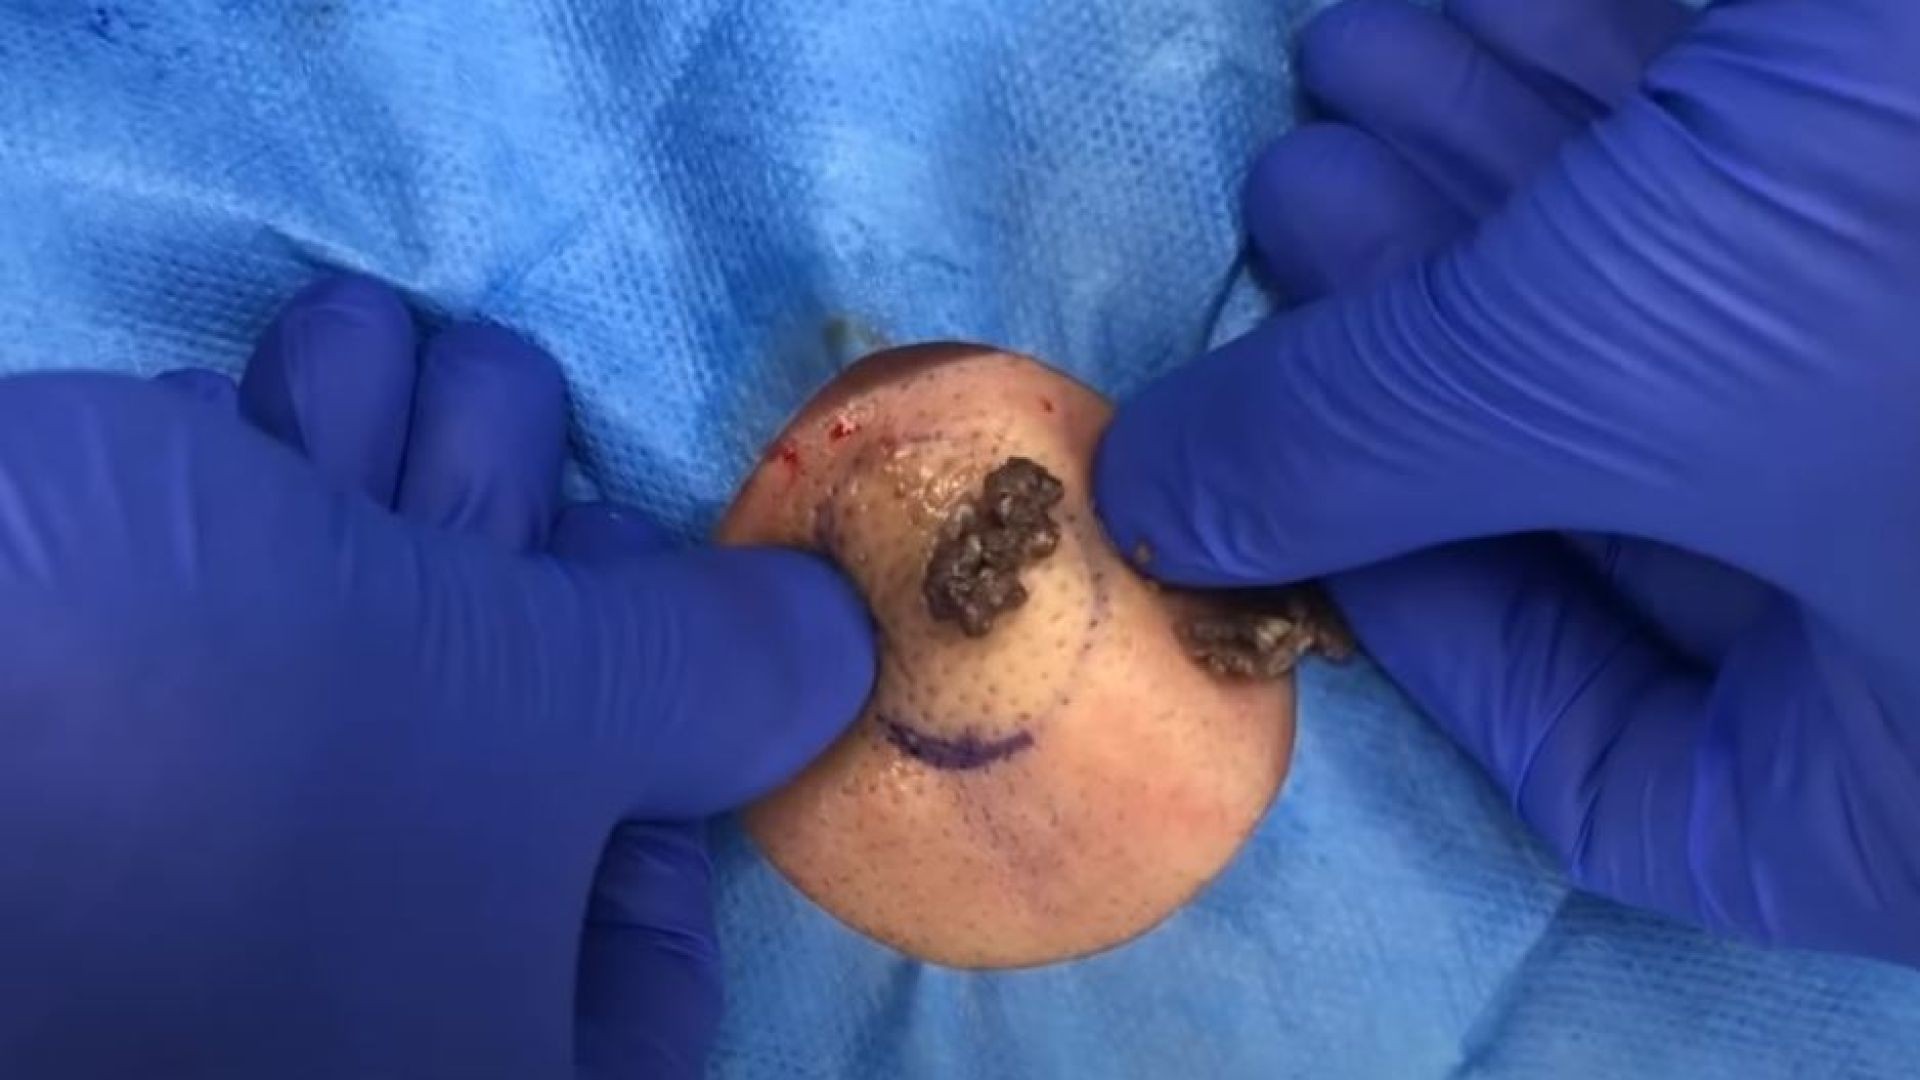 Cyst (Beluga Caviar) Extraction From Patient's Back